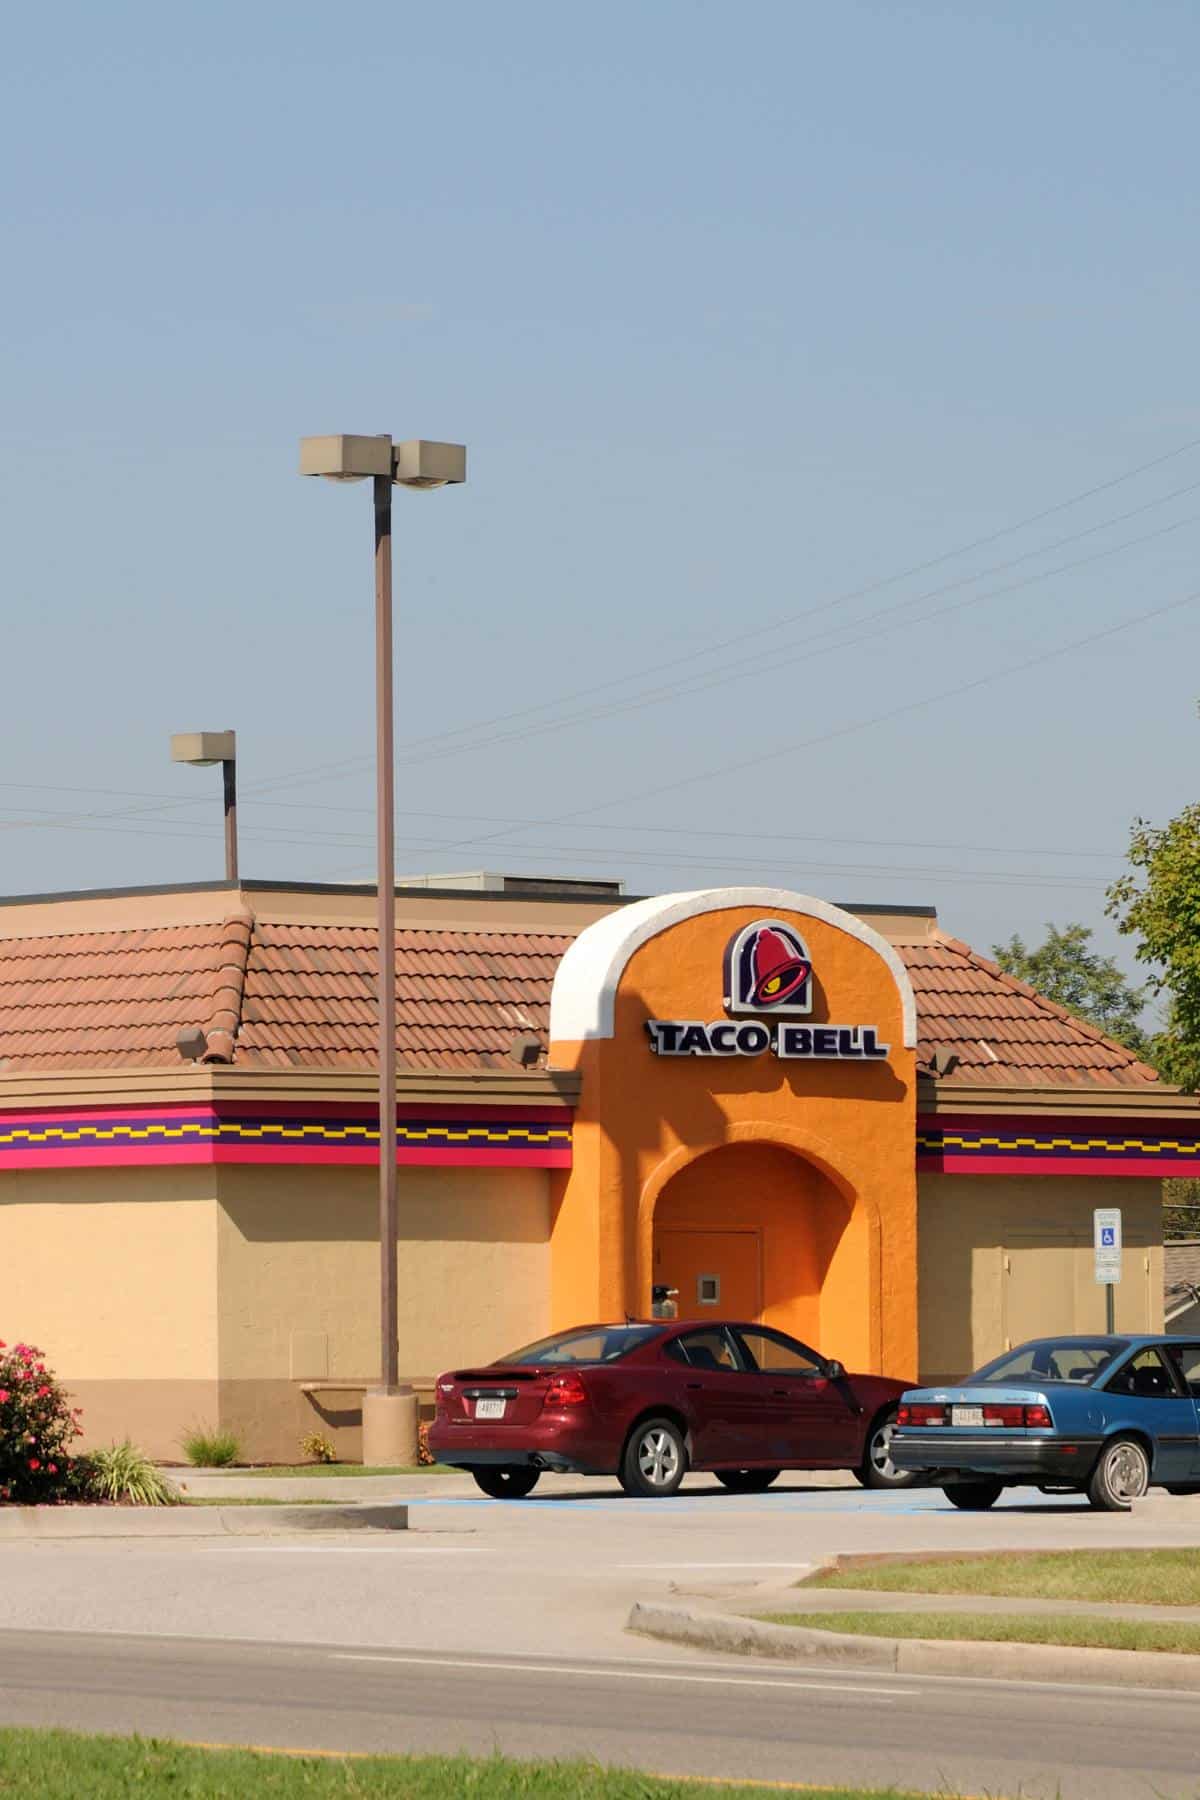 The outside of a taco bell restaurant and its sign.